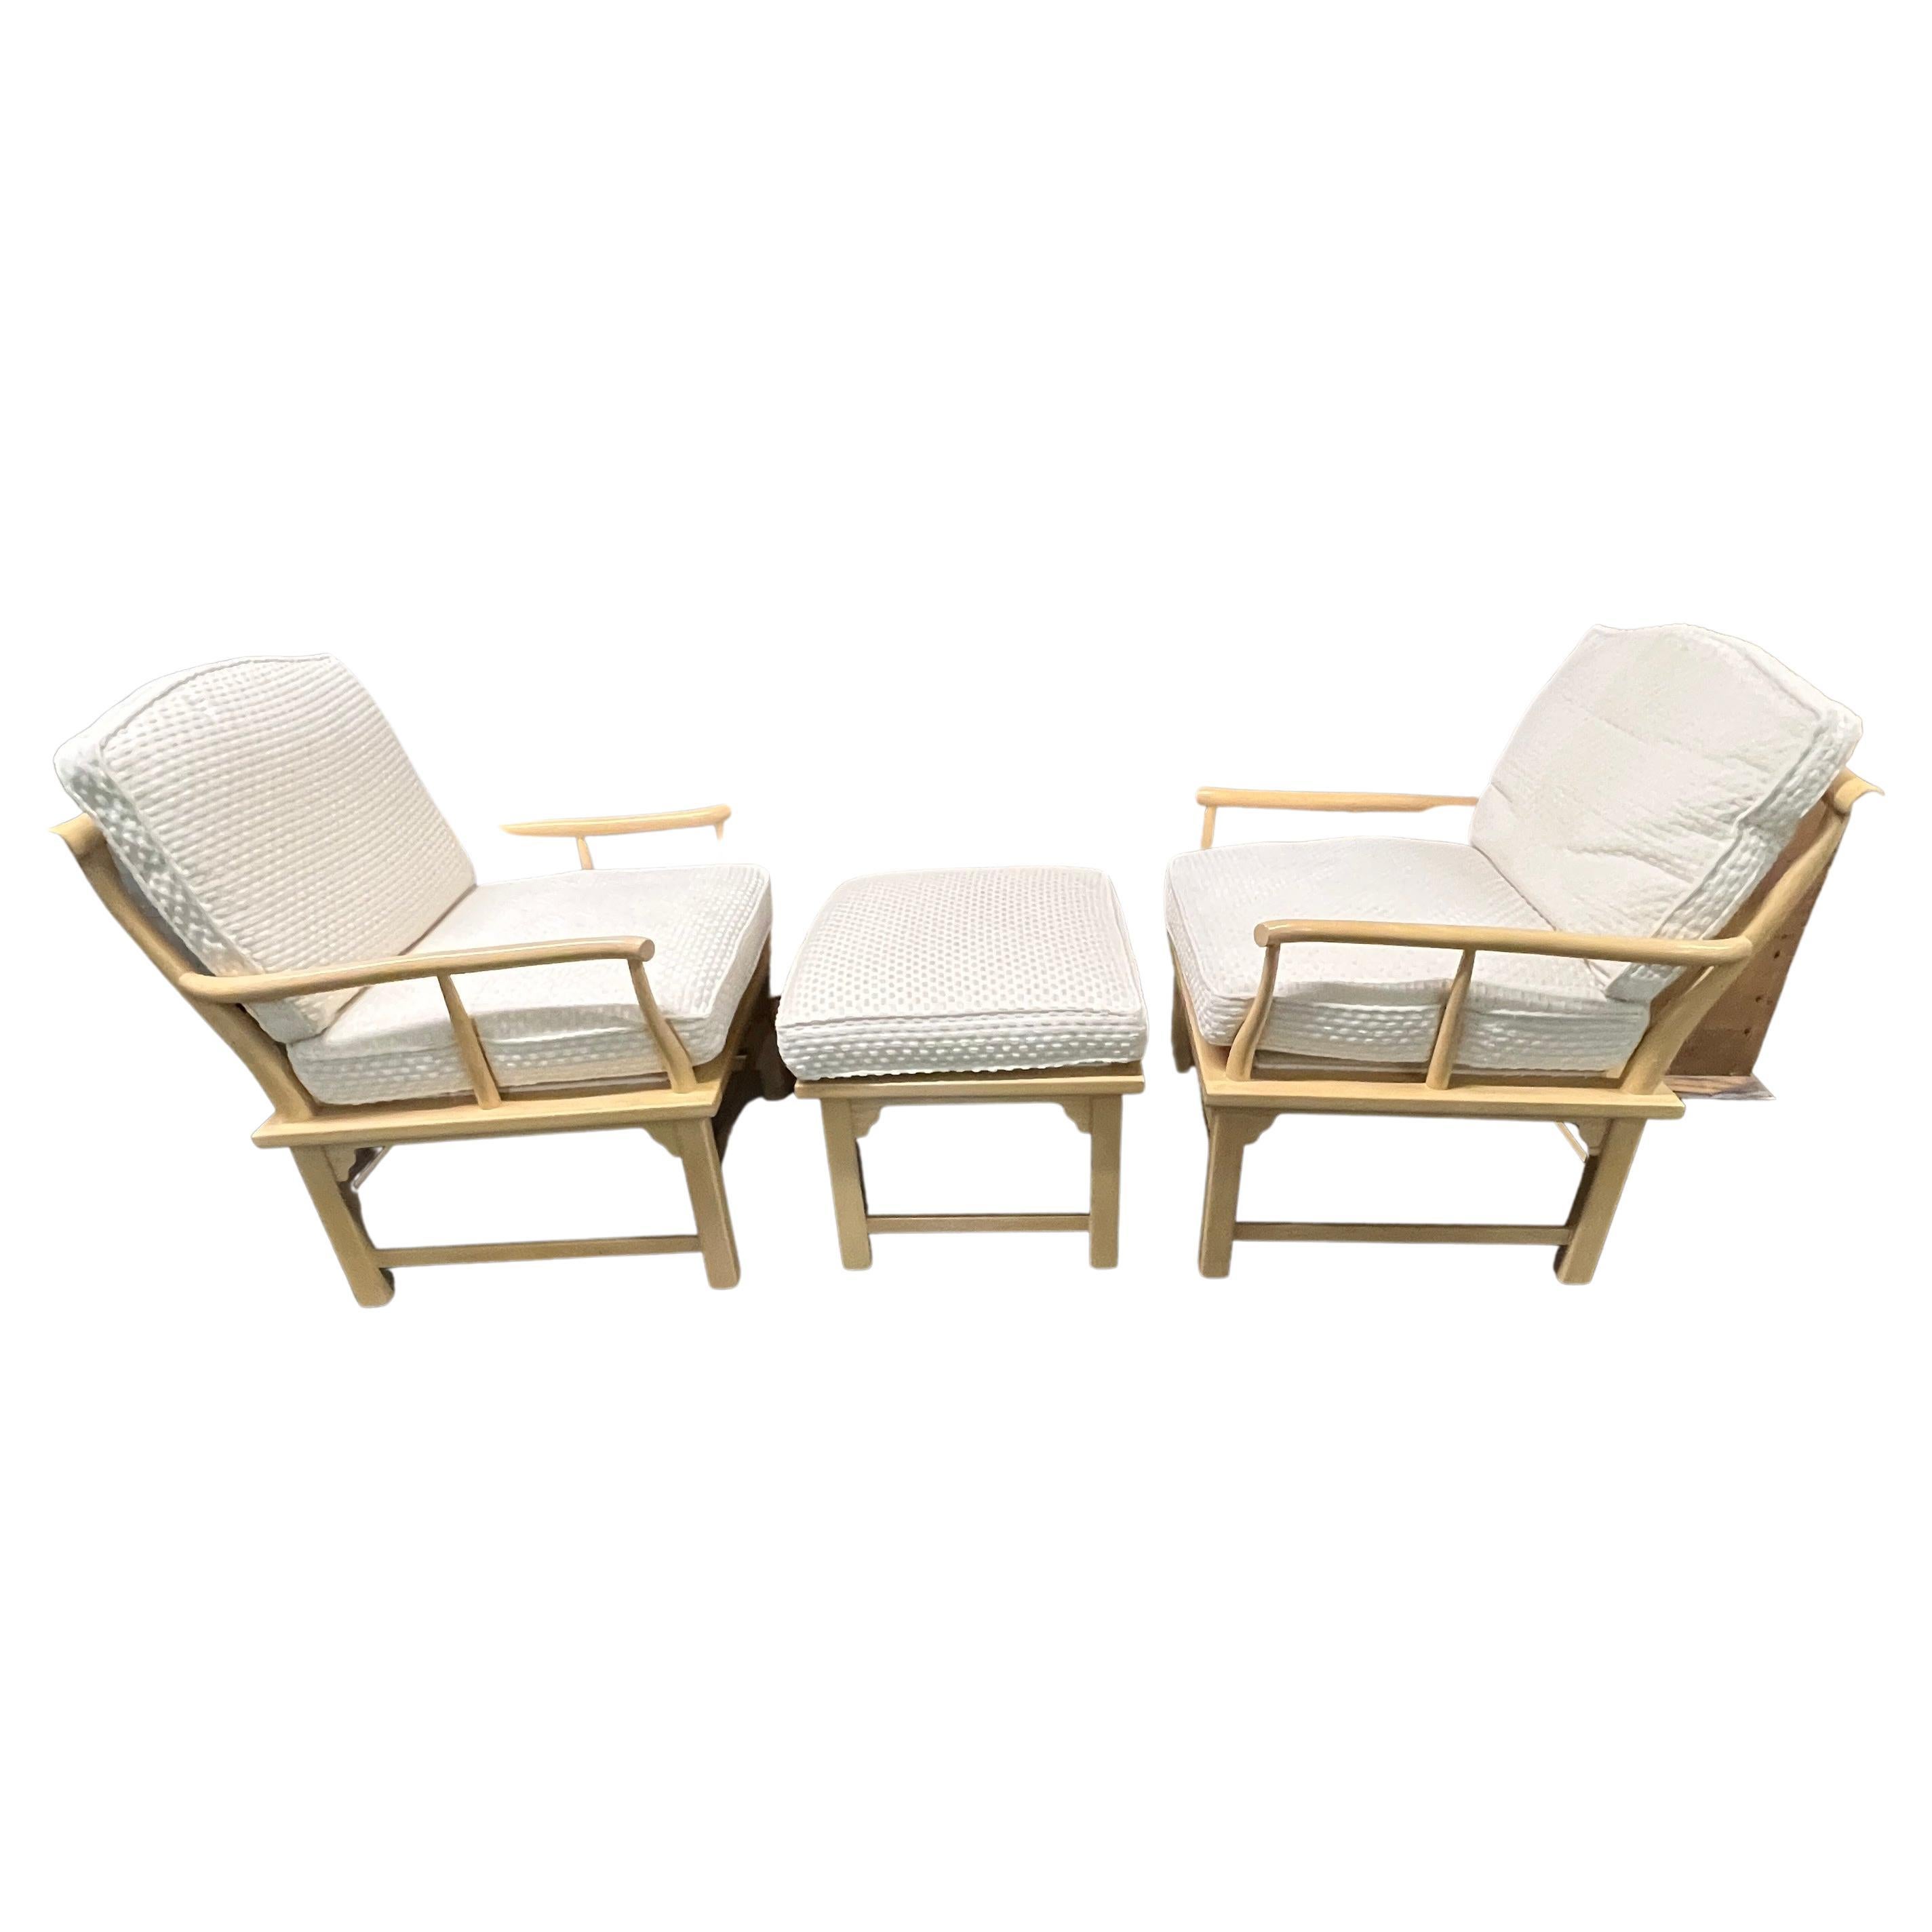 Ming Style Chairs with Upholstered Cushions and Ottoman by Century Chair